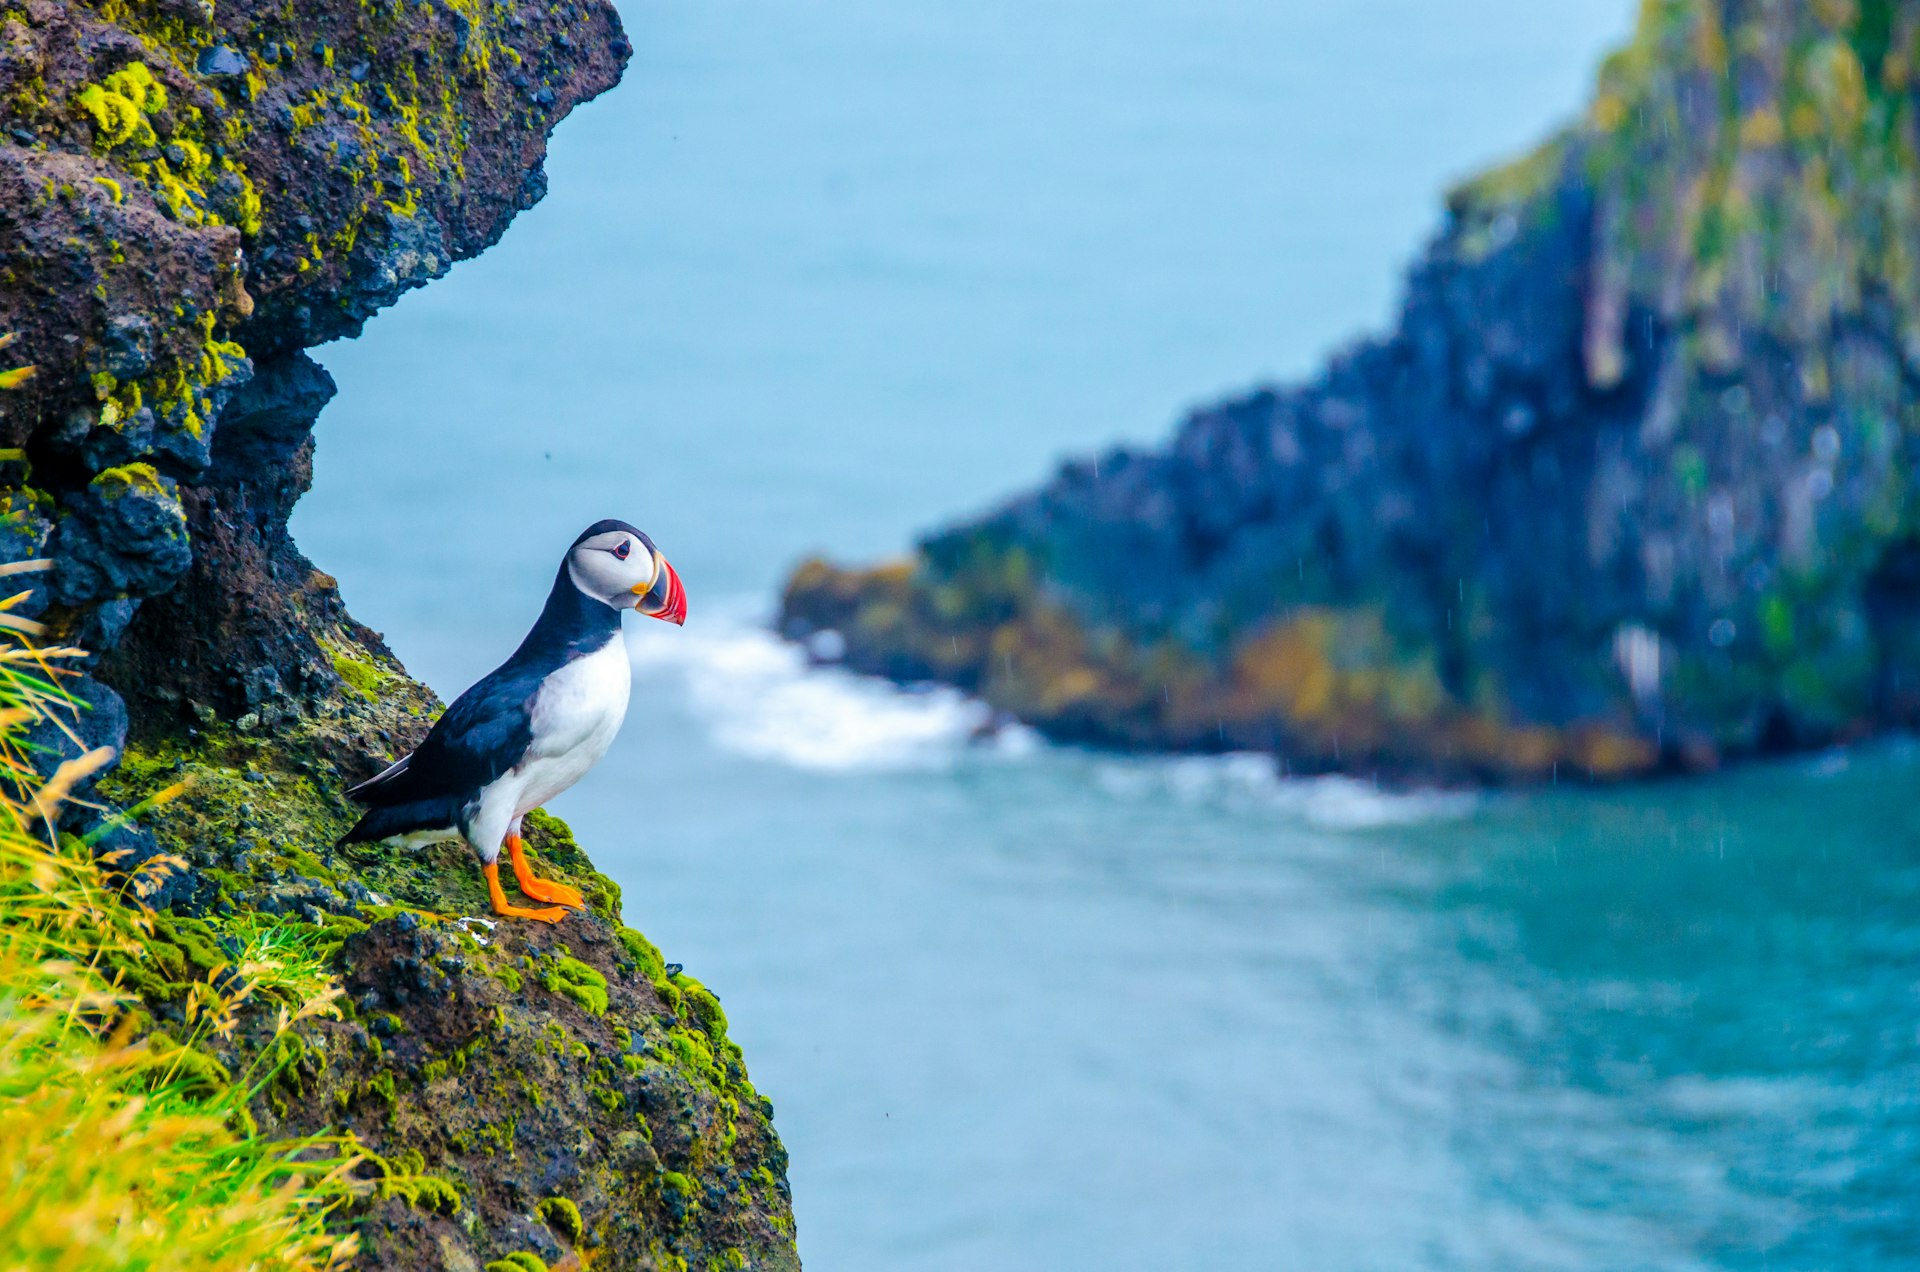 A black and white bird with a colorful beak and bright orange feet stands on the edge of a cliff in a fjord